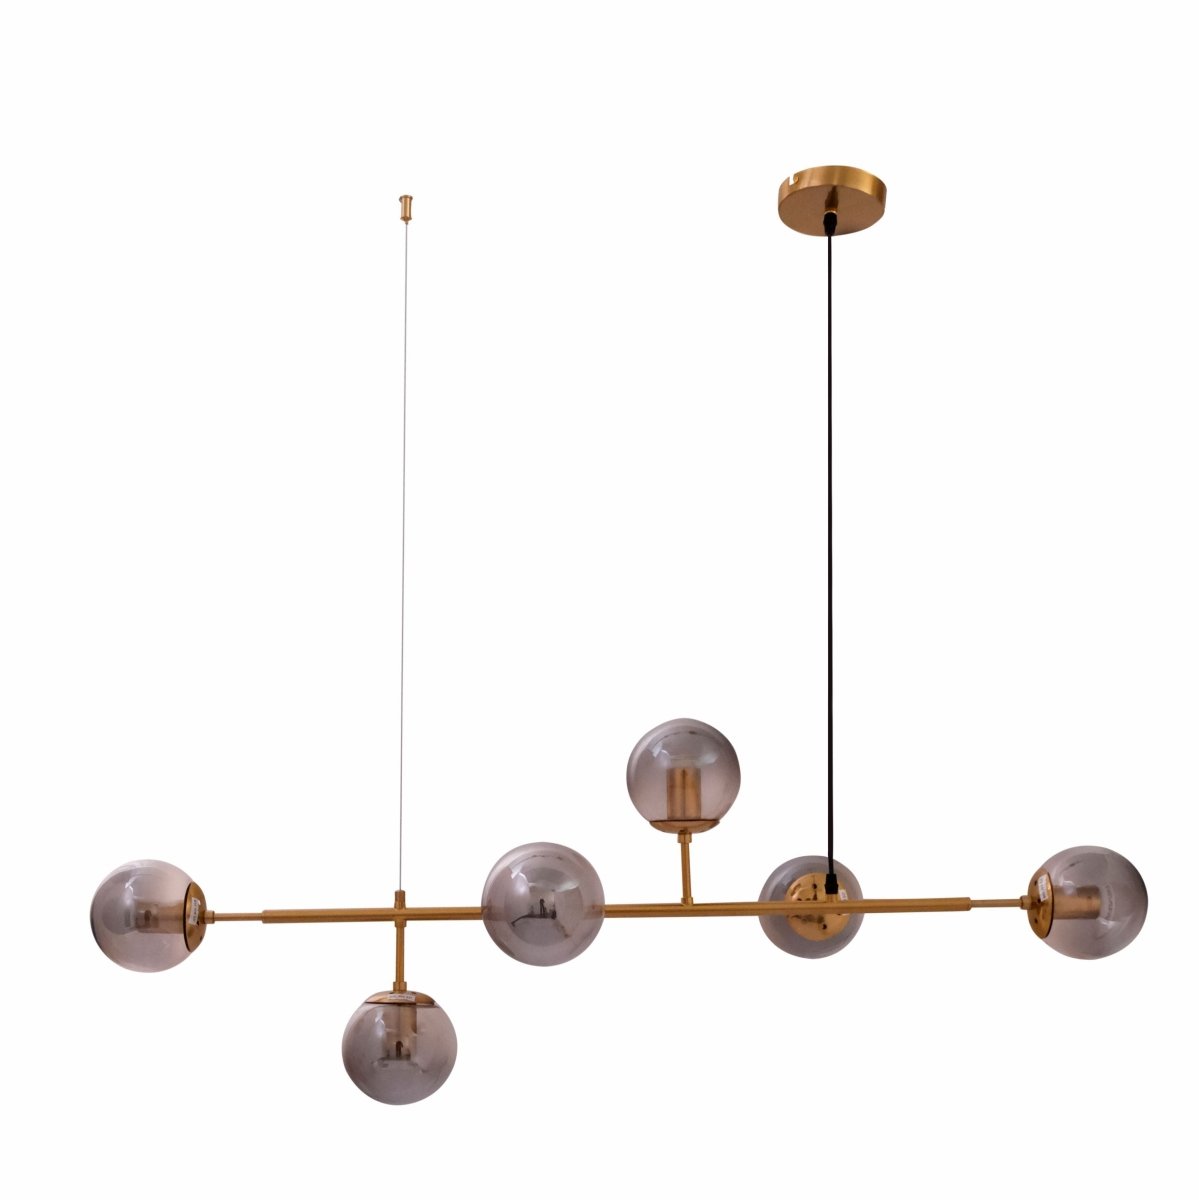 Main image of Smoky Globe Glass Gold Metal Body Island Pendant Chandelier Light with 6xE27 Fitting | TEKLED 159-17536